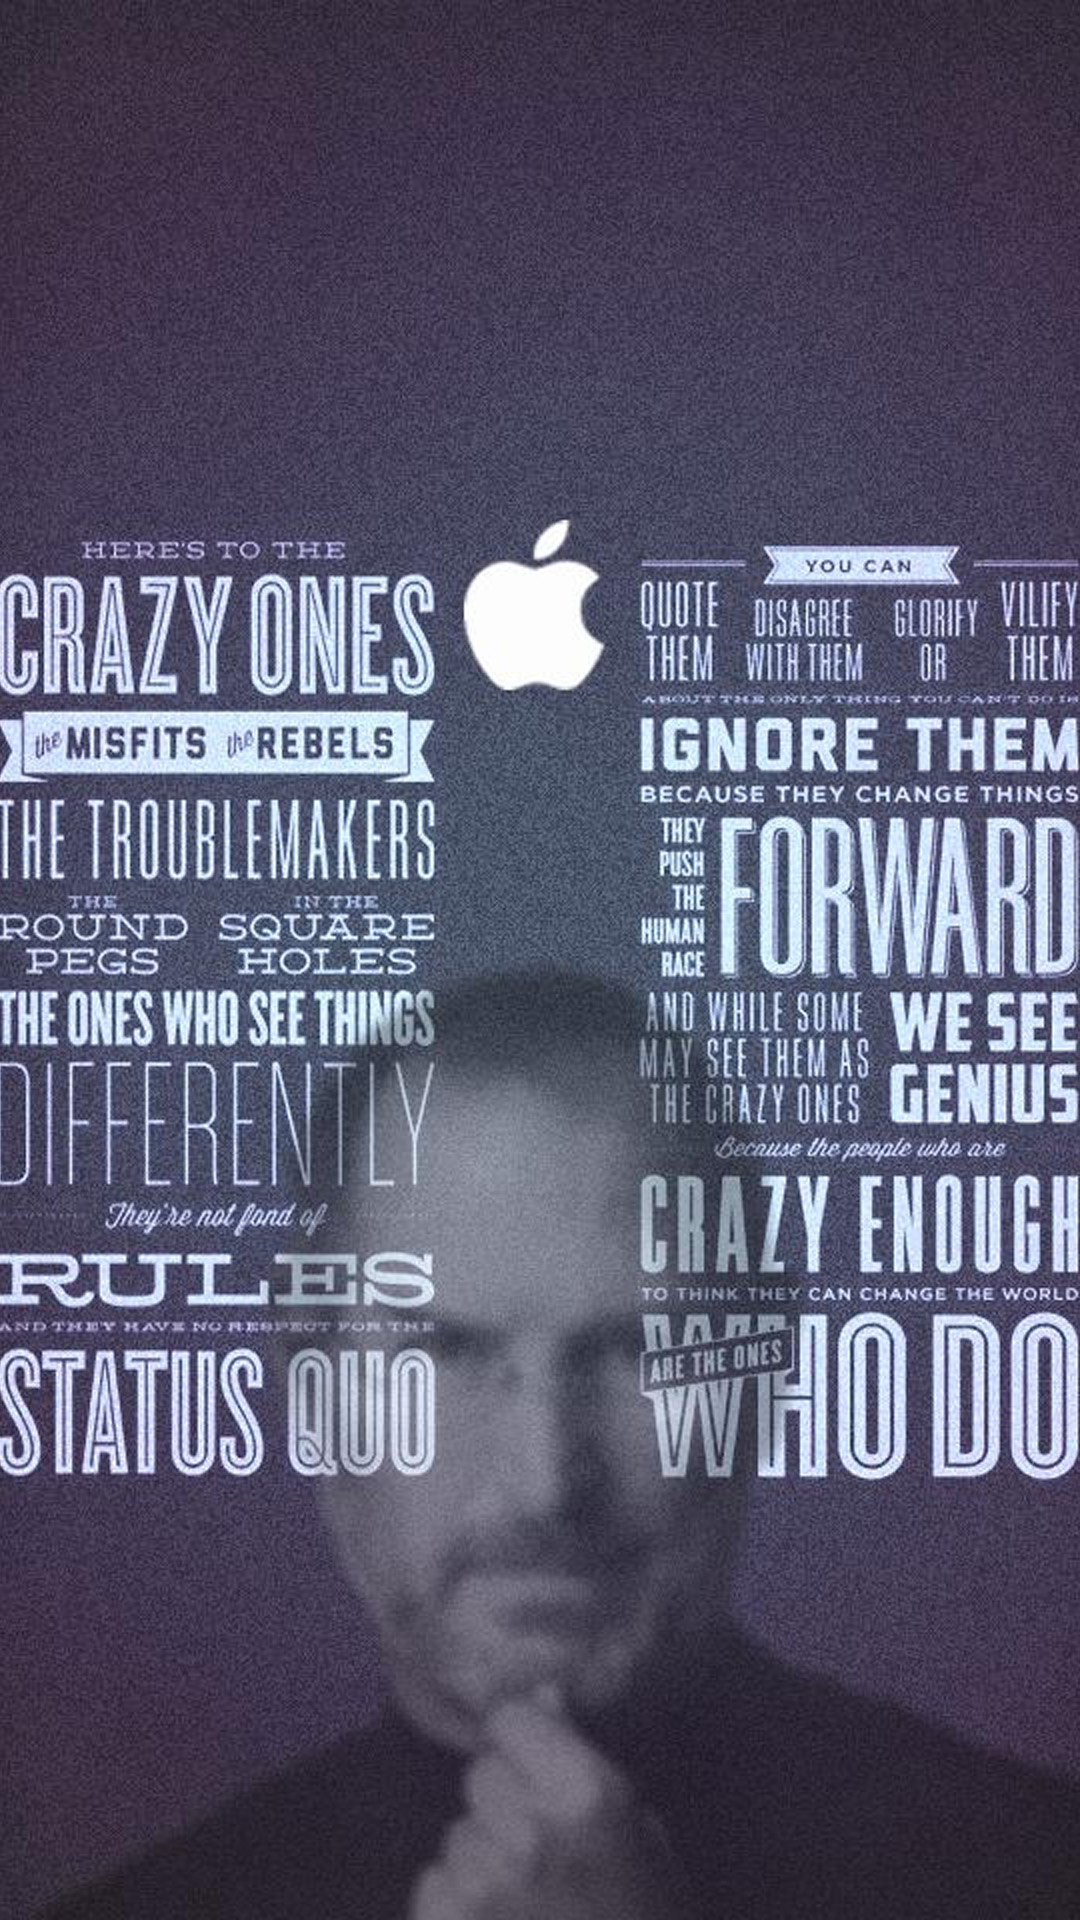 Steve Jobs Quotes Wallpaper For iPhone